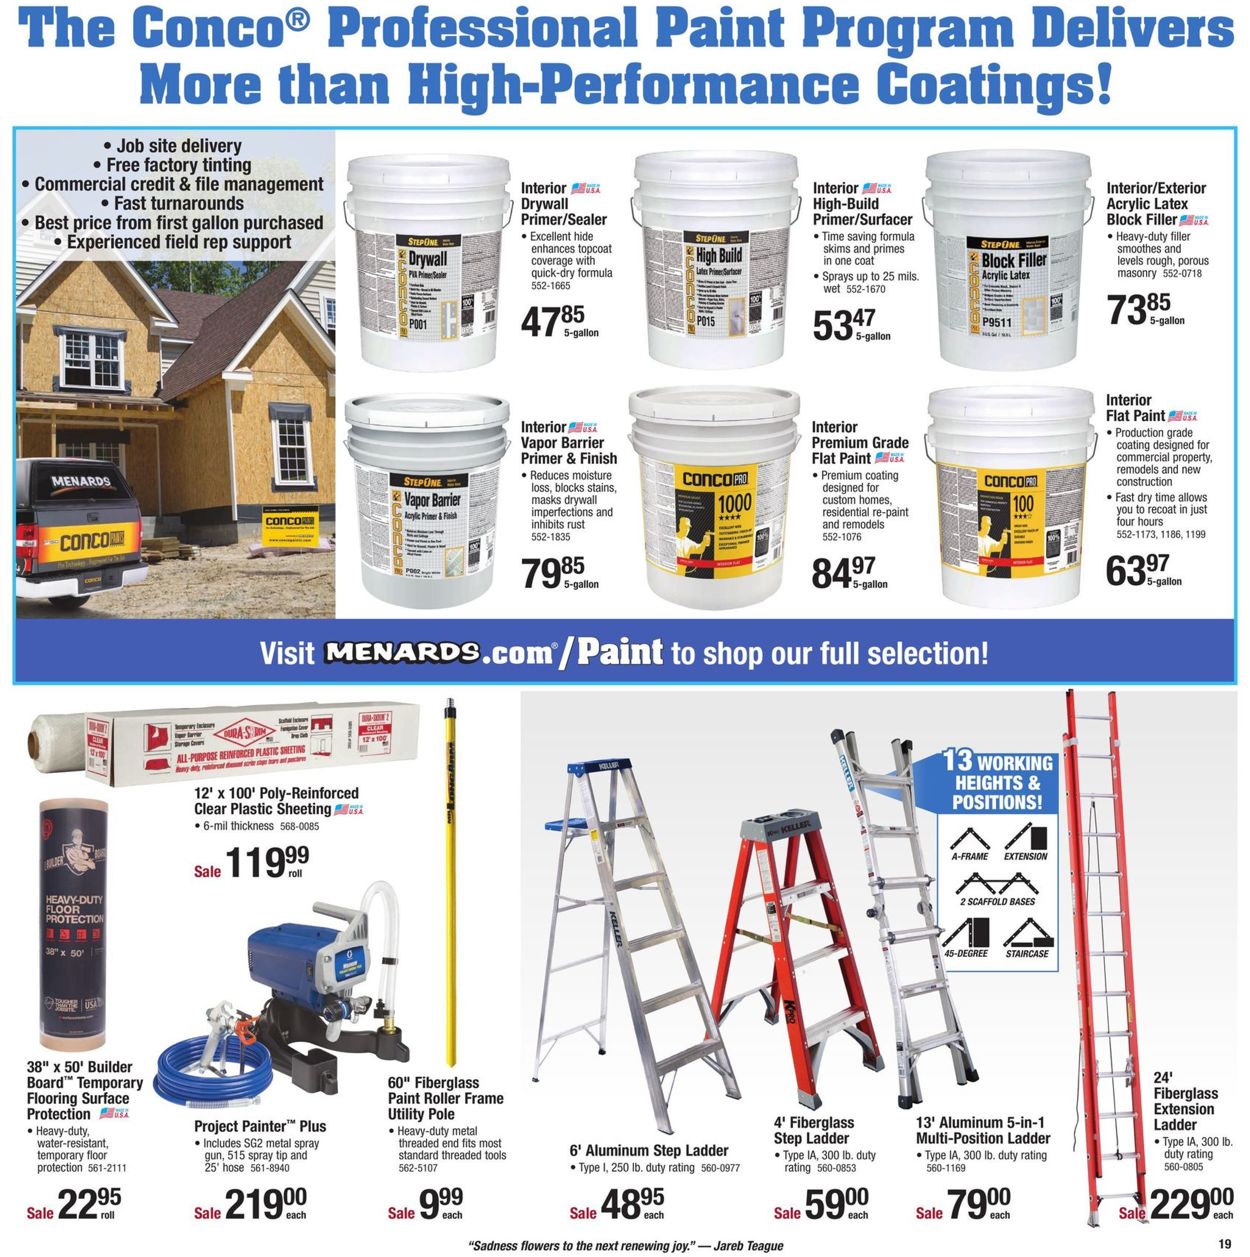 Catalogue Menards Project Day Sale 2021 from 01/03/2021